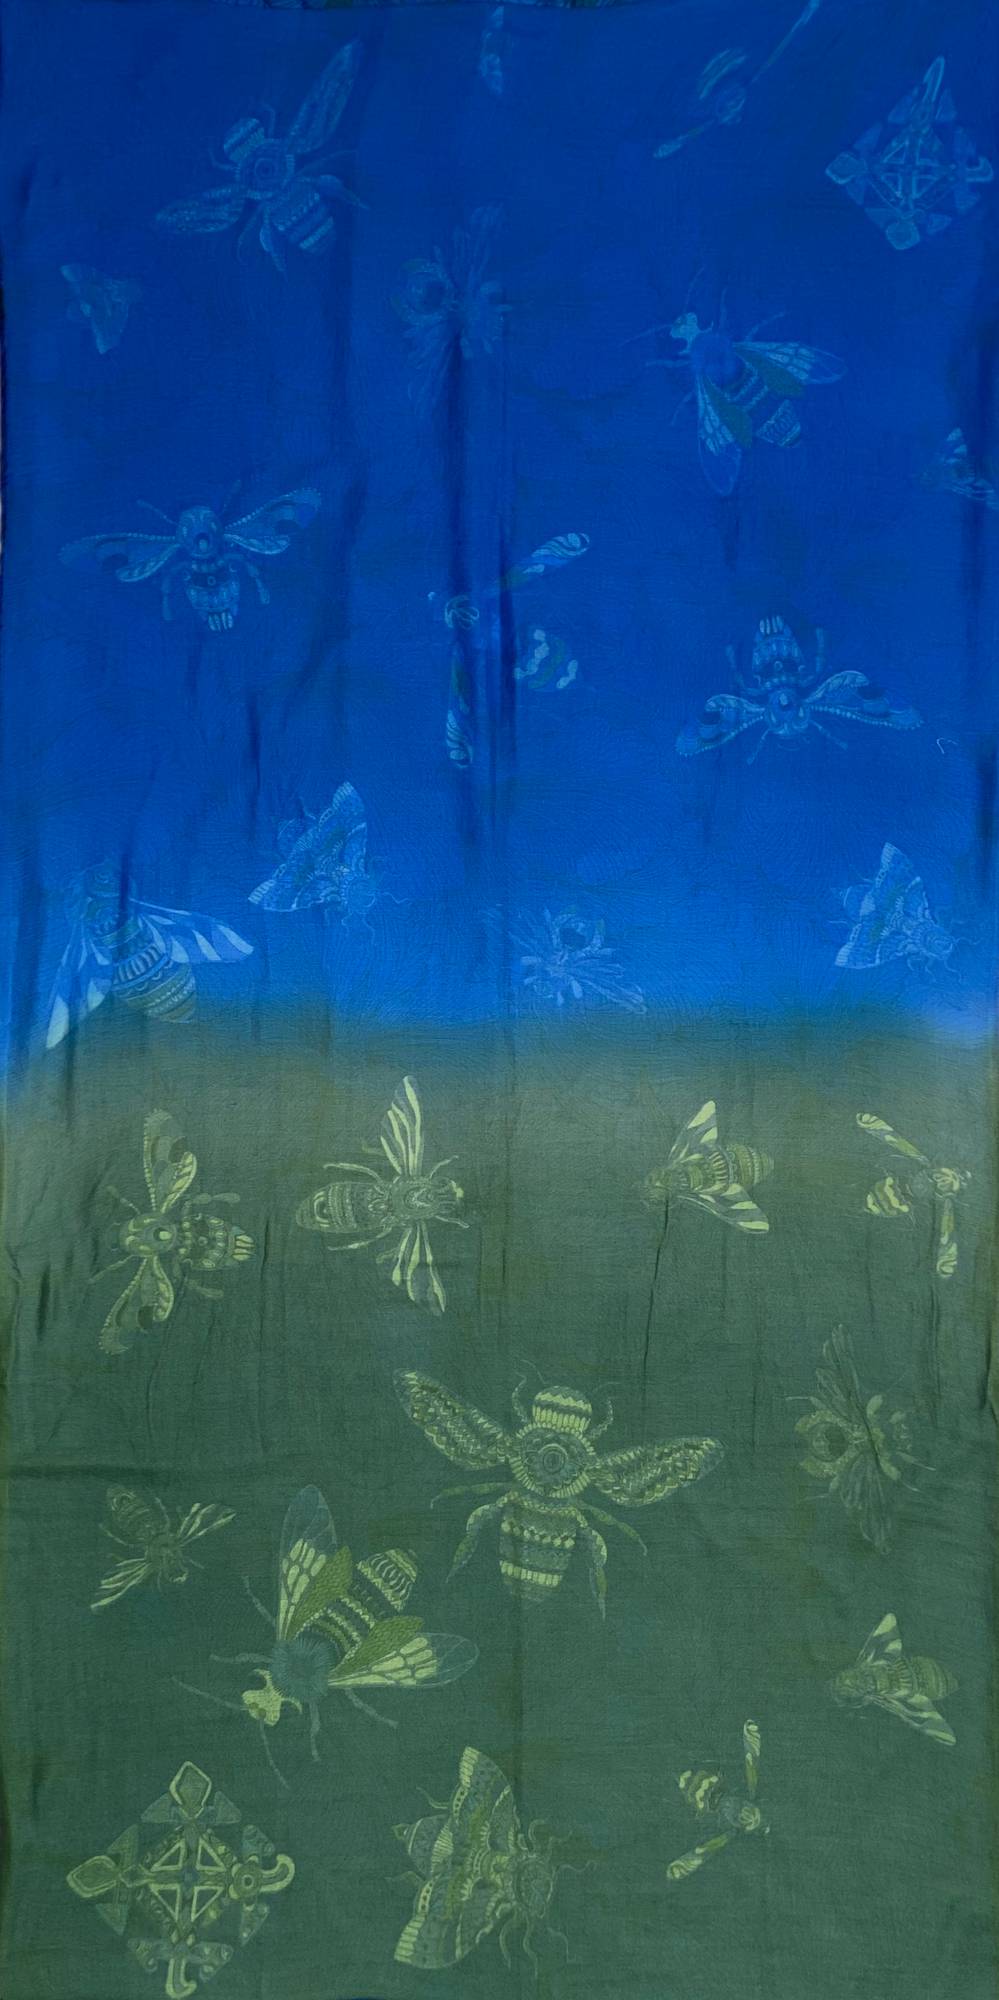 Scarf two-layer doubleface silk printed "JUST BEES" 100x200 back 100% cashmere blue-green